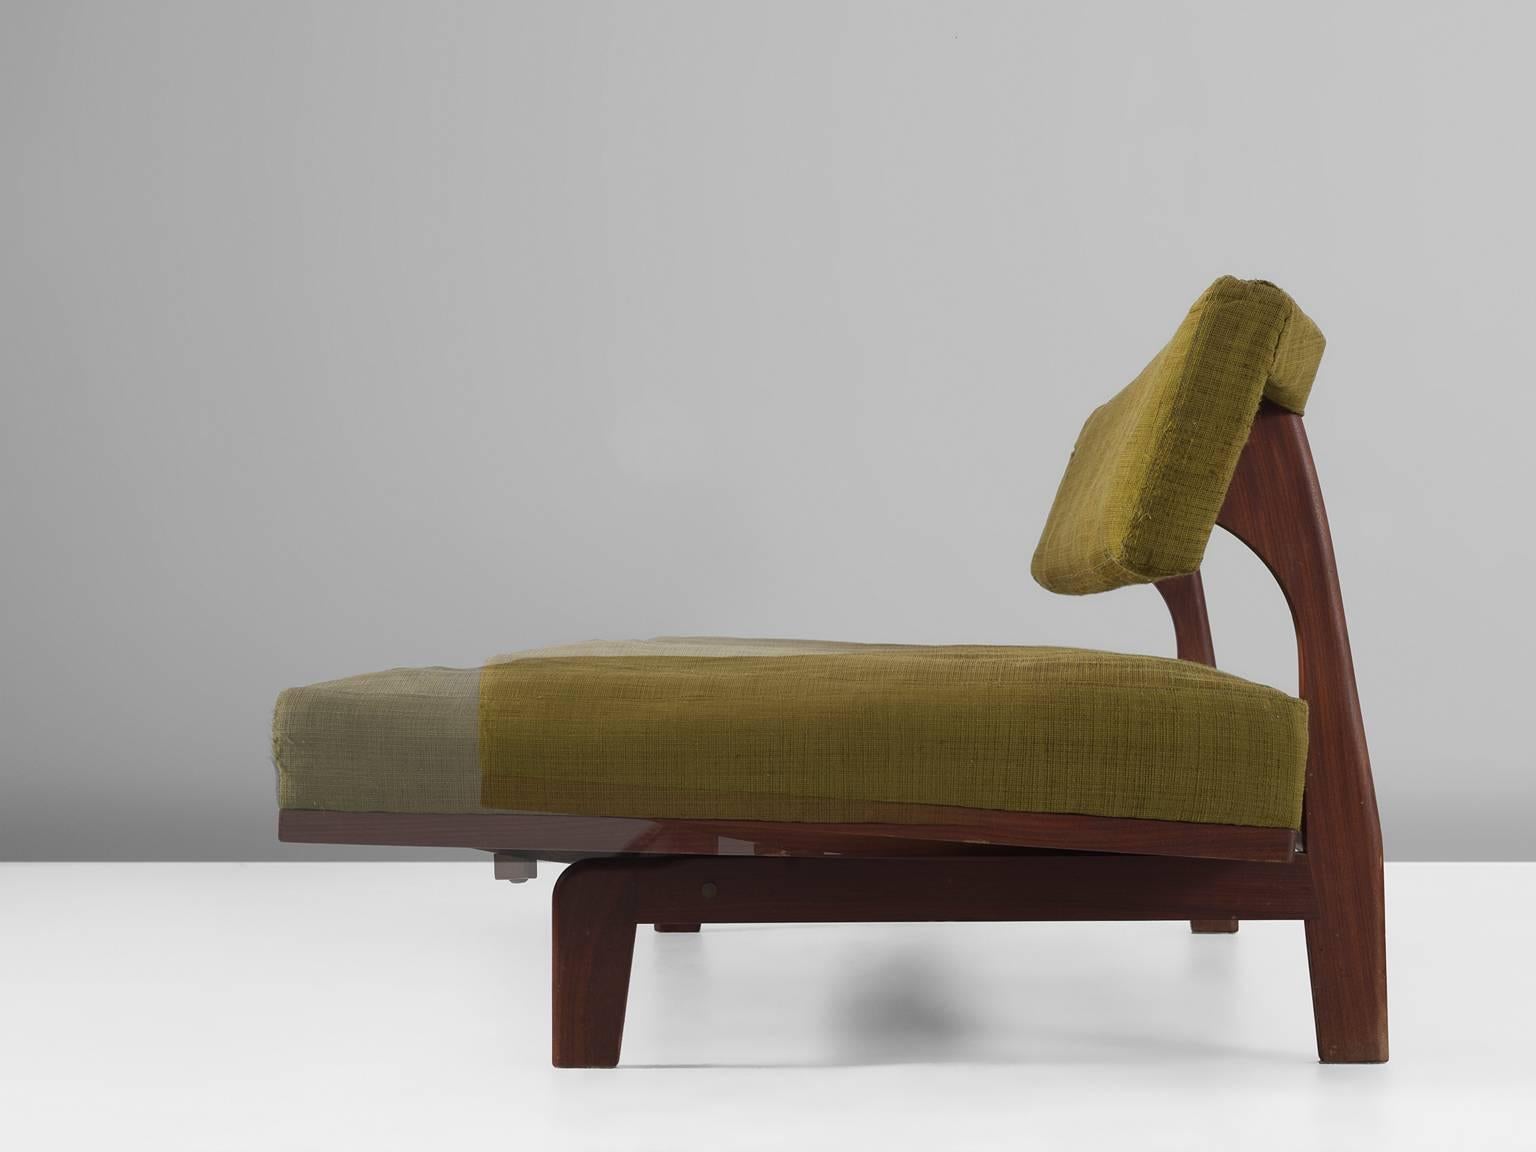 Sofa, fabric, teak, 1960s, Germany.

This small sofa is pure and clean in its appearance. The sofa can also function as a sofa bed thanks to its extendable seat. This bench is fits into a tradition of functional modern German design and is designed